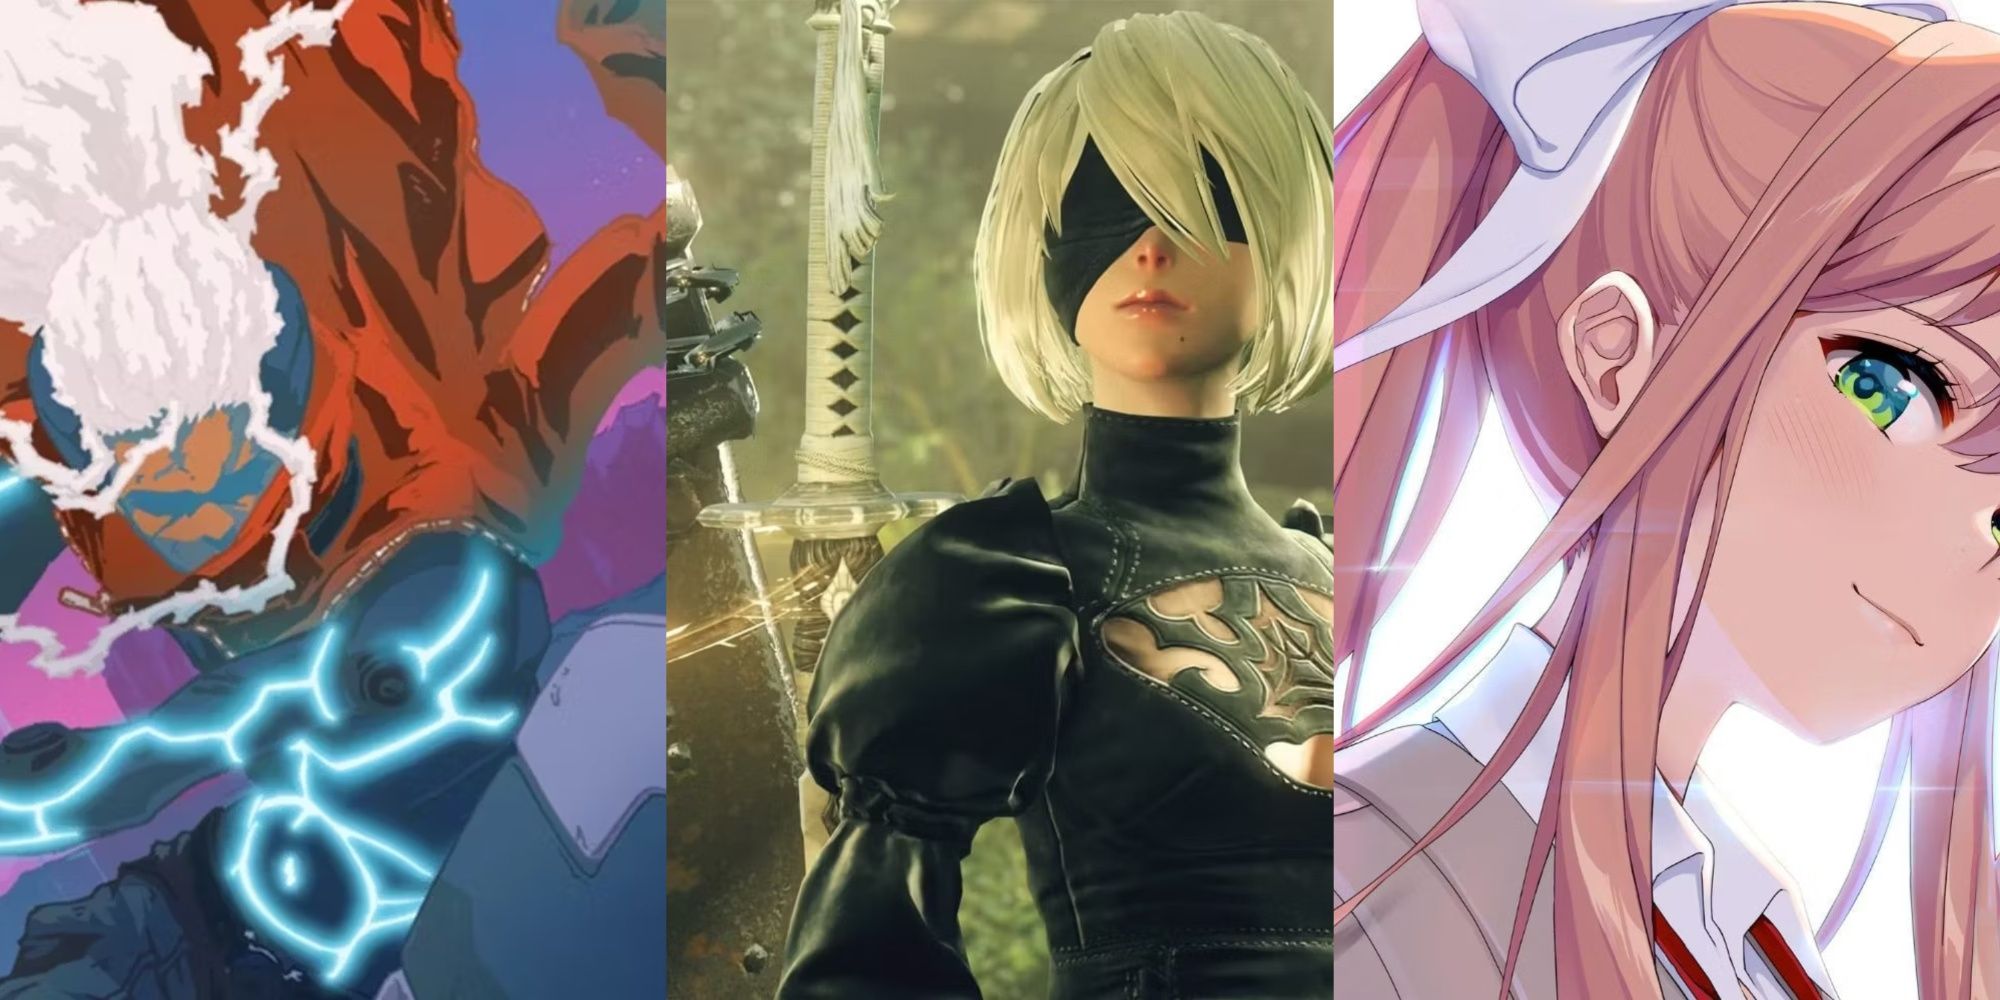 The main character from Furi, 2B from Nier Automata and Monica from Doki Doki Literature Club, left to right